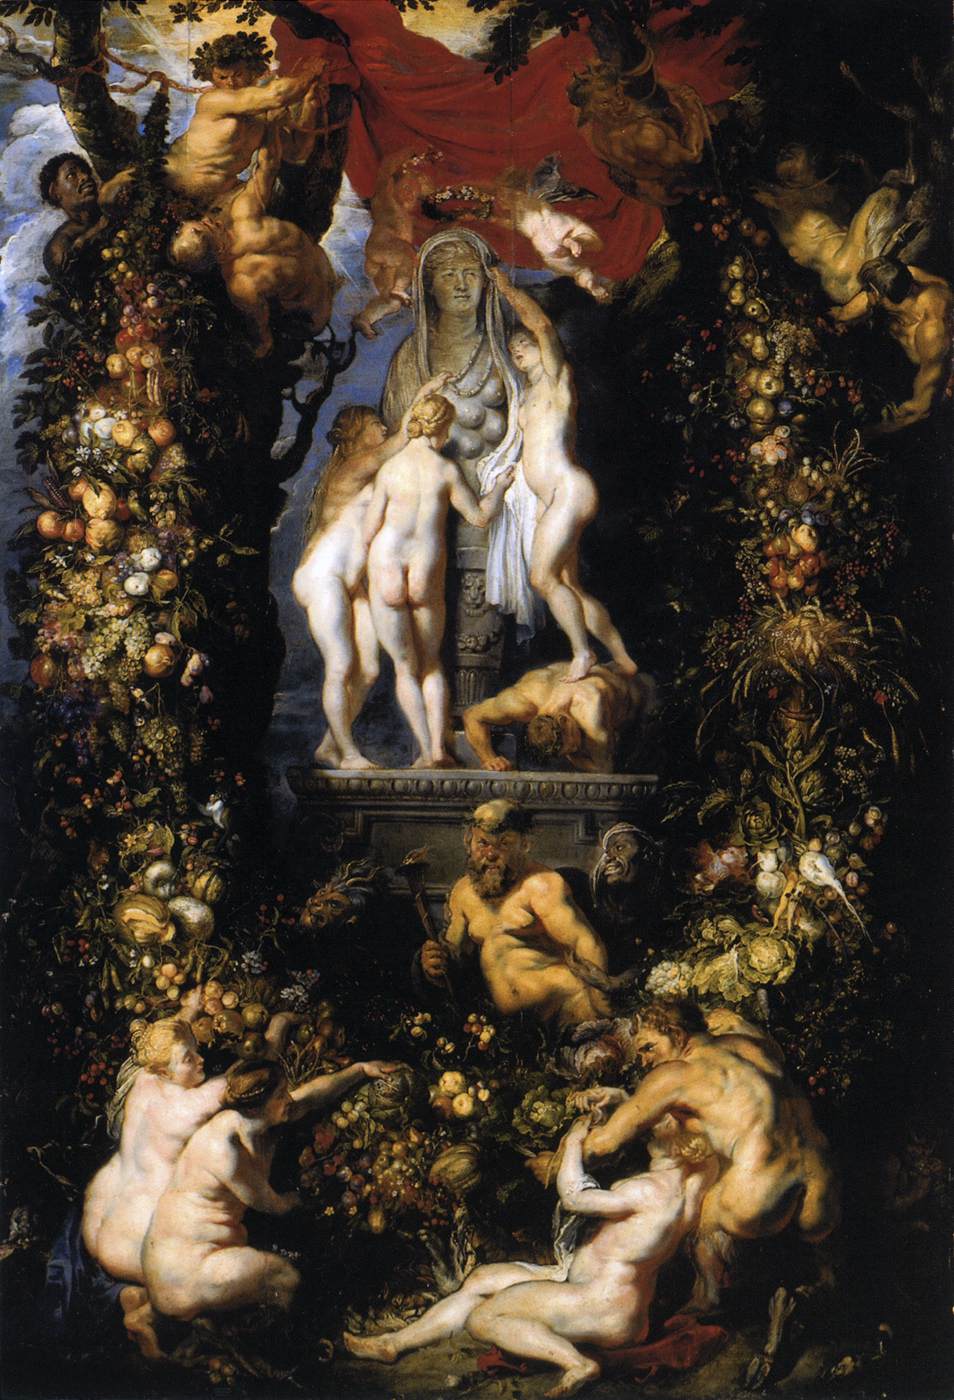 Nature Adorning the Three Graces by Peter Paul Rubens Reproduction Oil Painting on Canvas